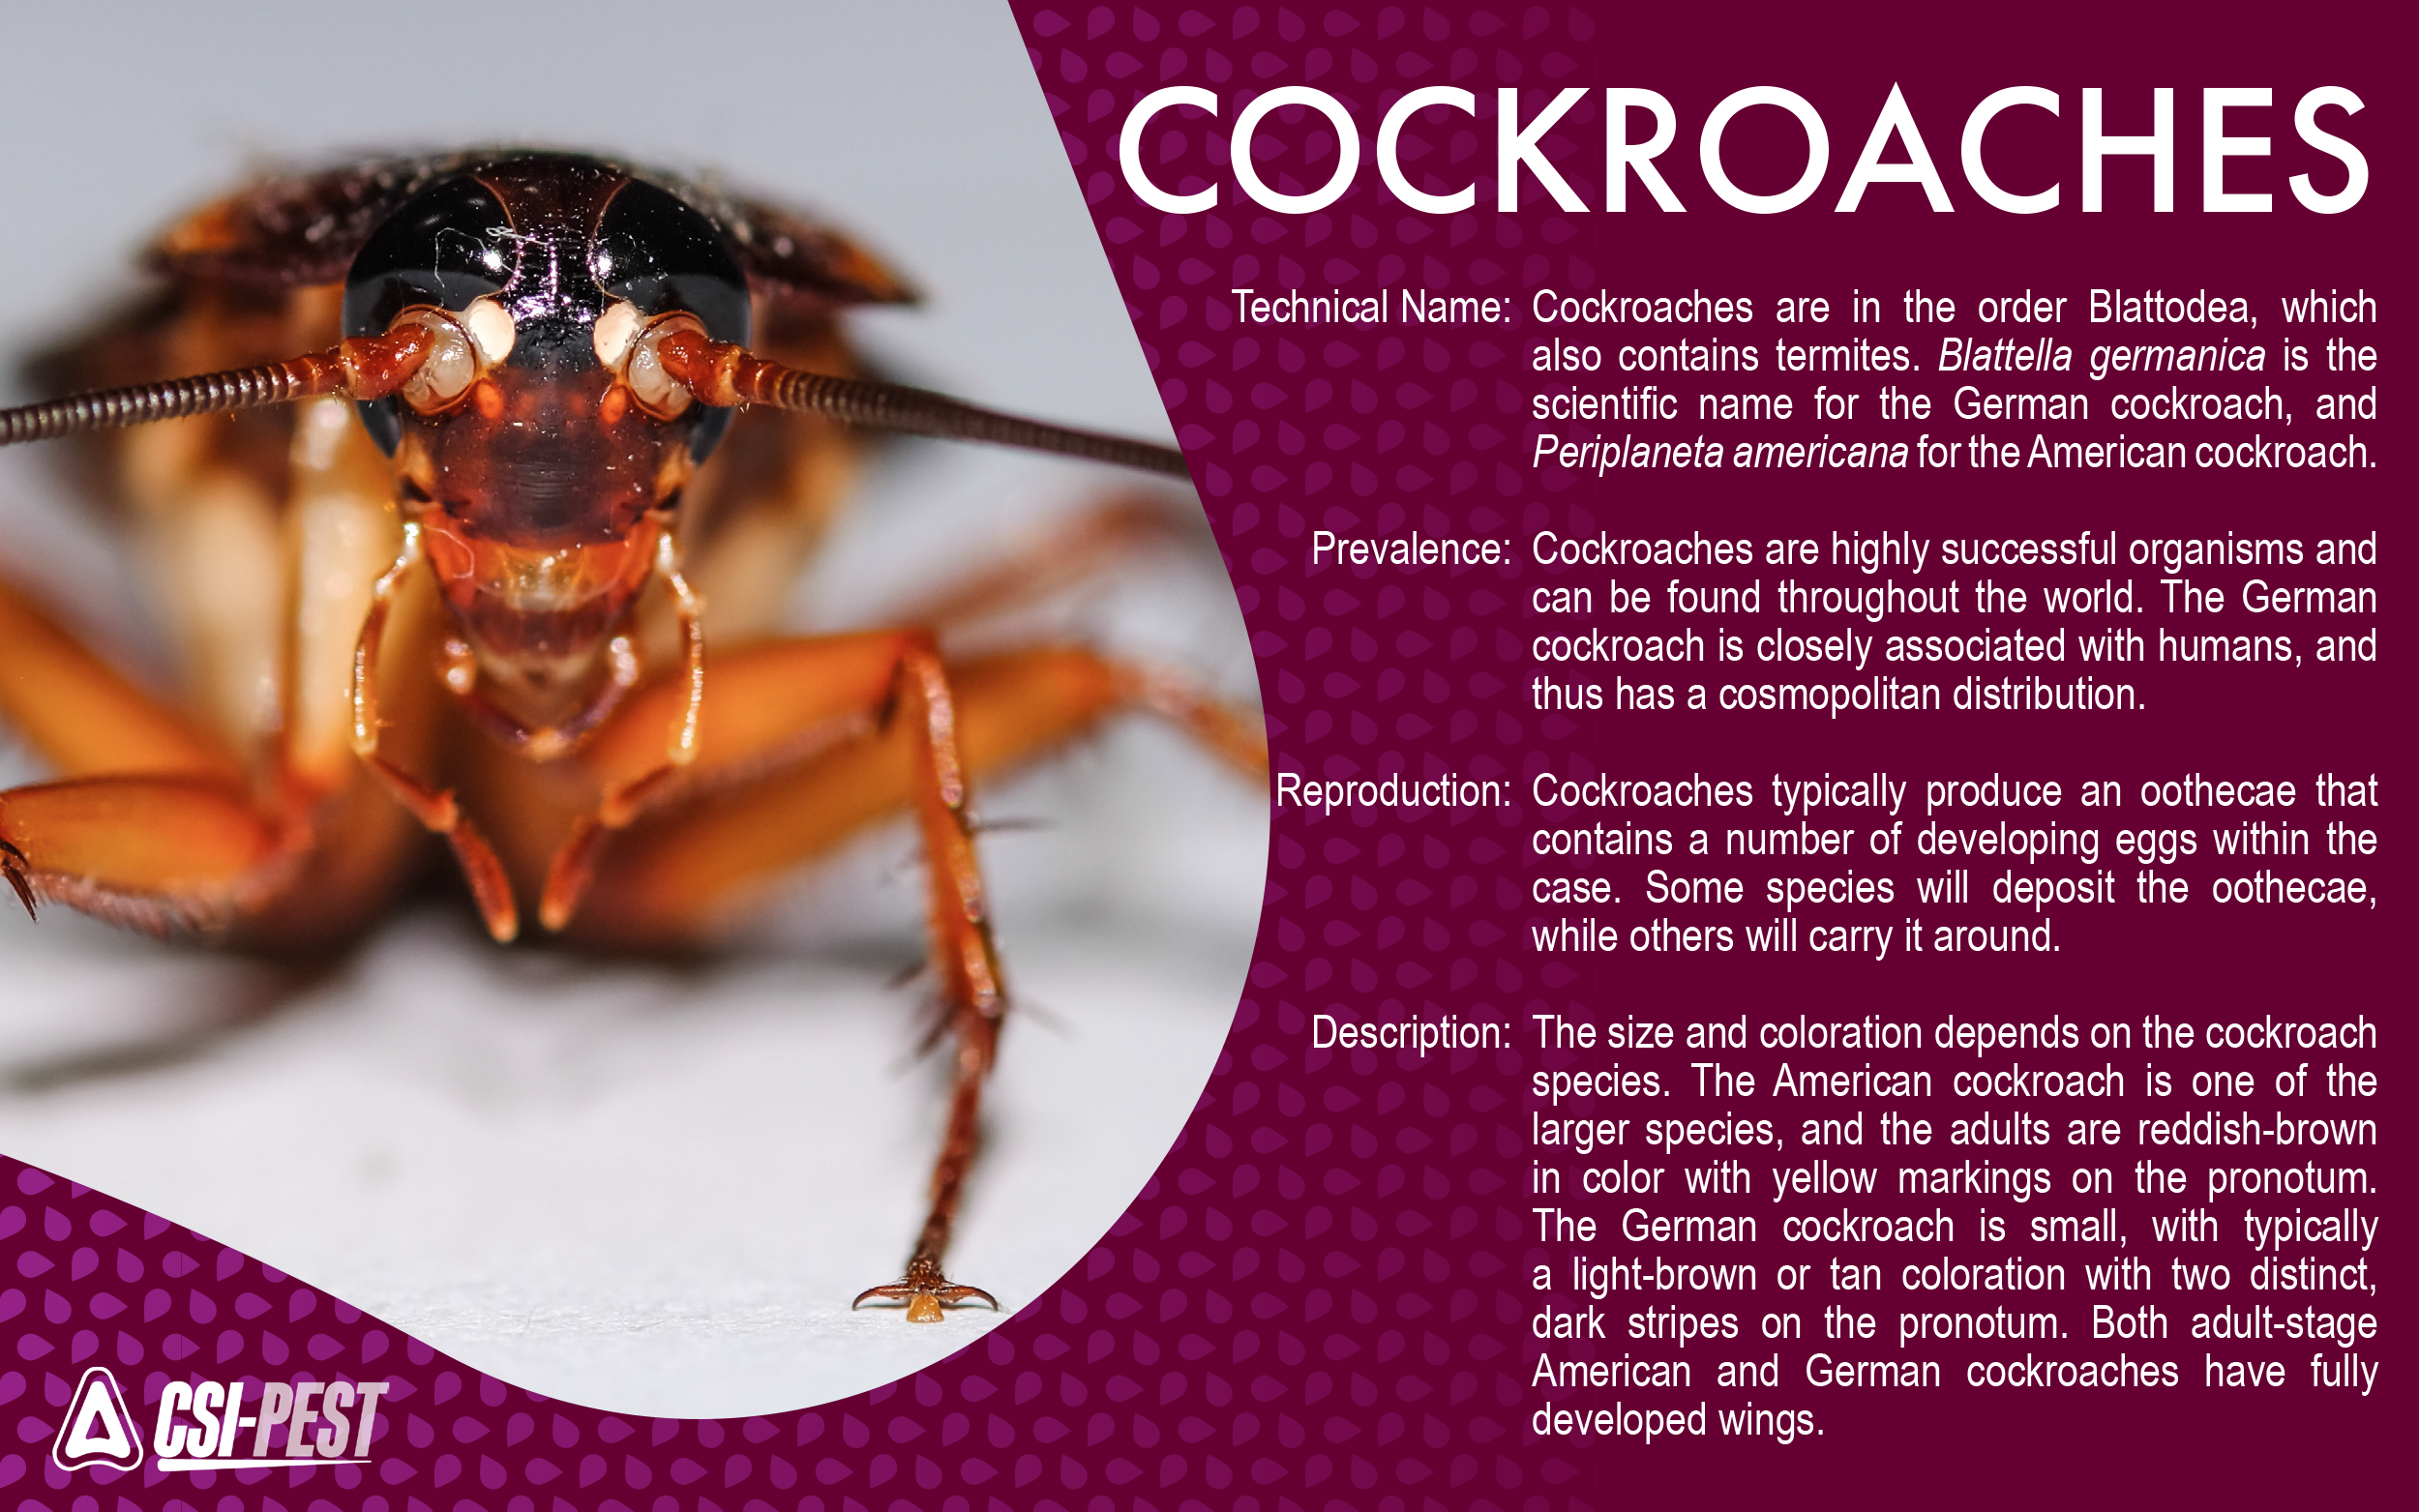 A Closer Look at Cockroaches